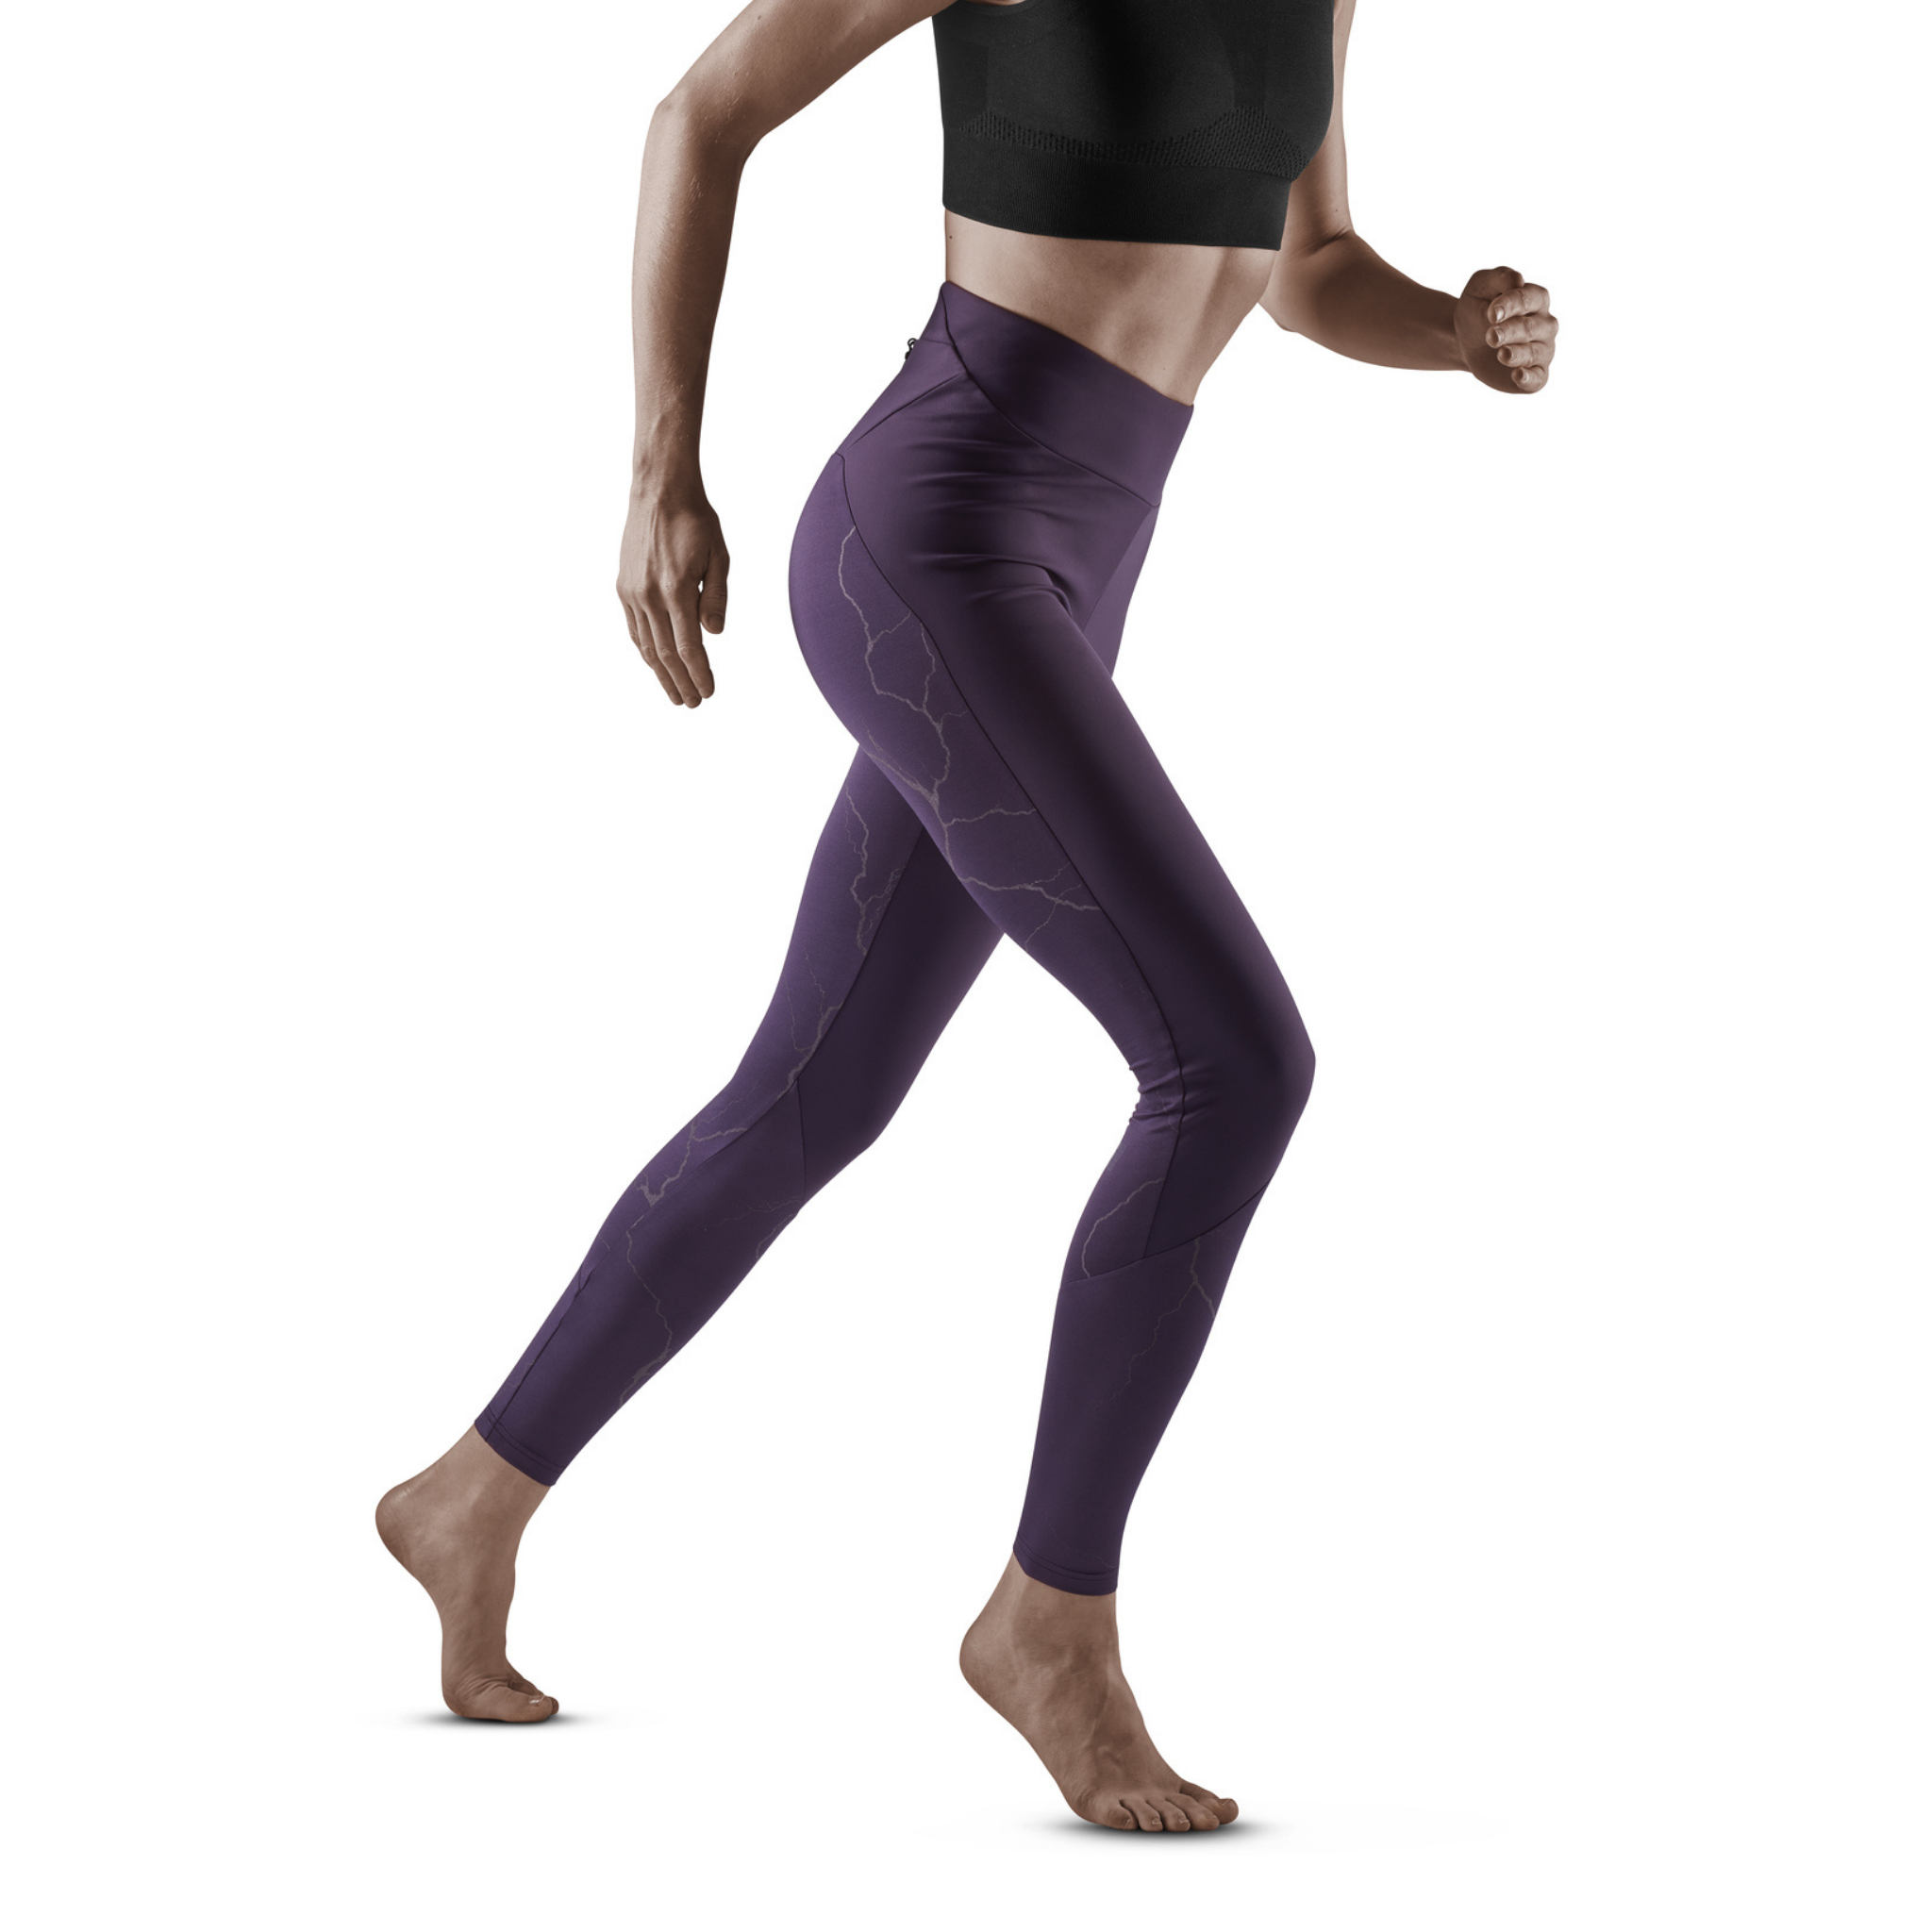 Reflective Tights for Women